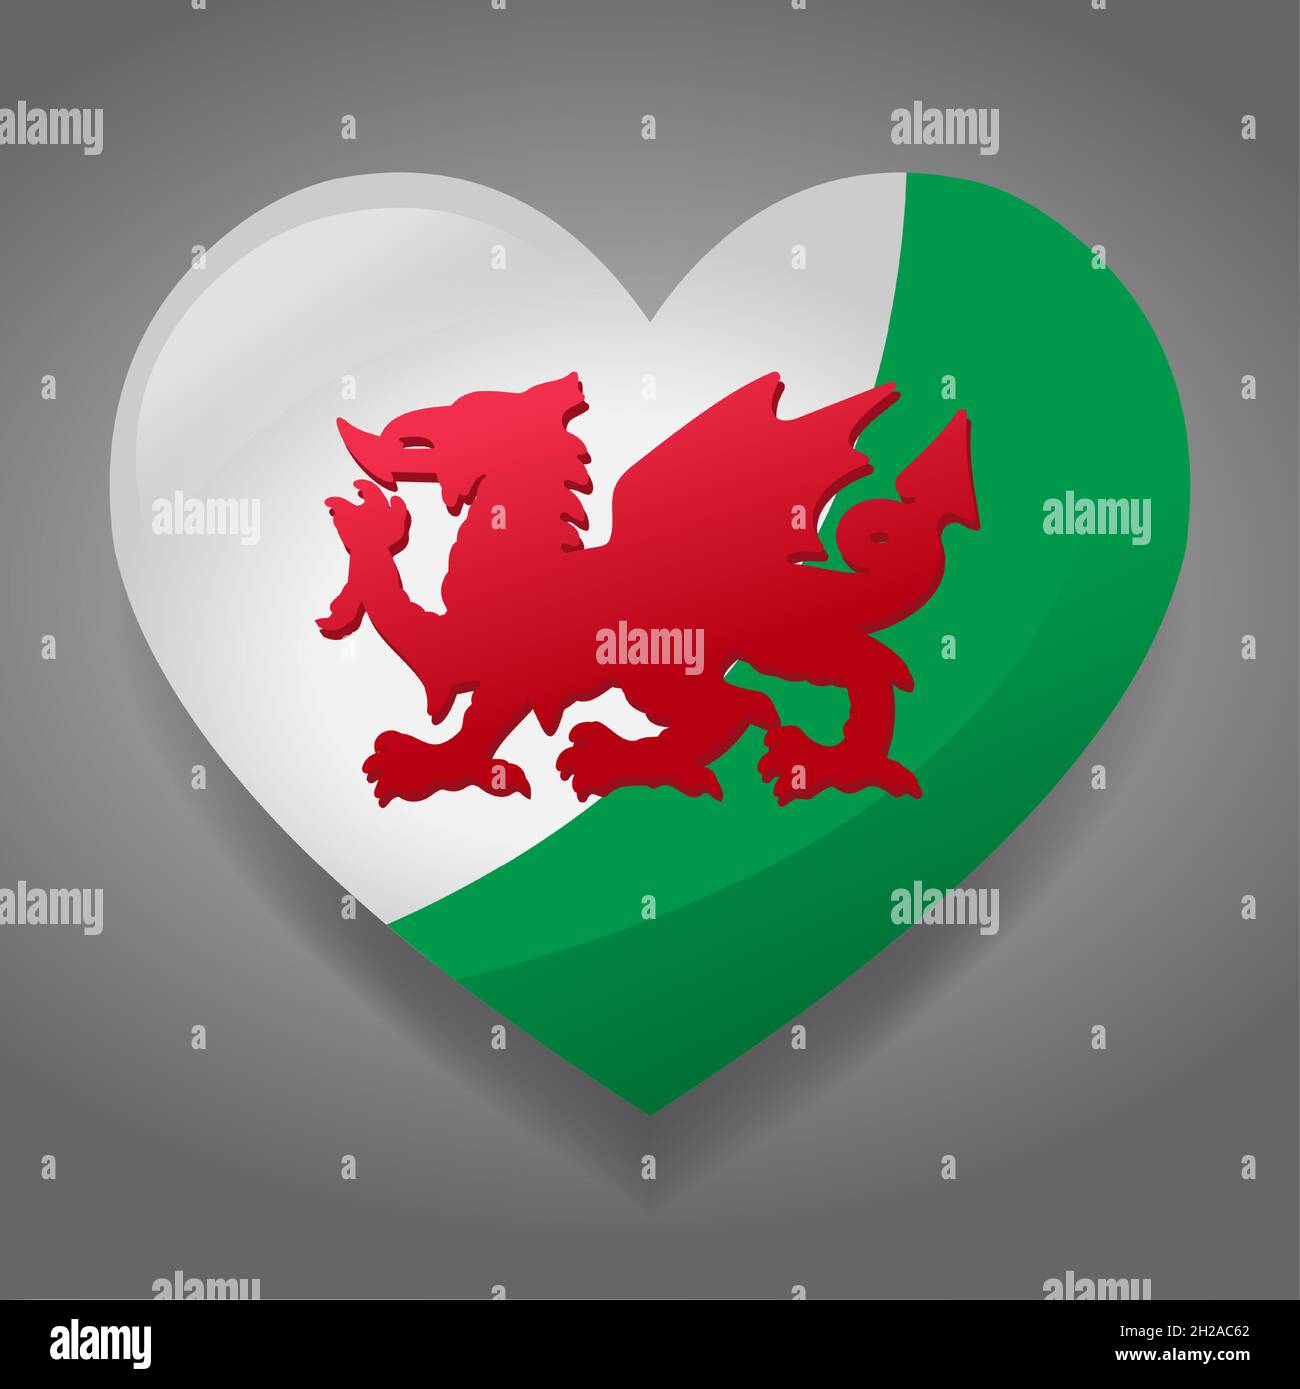 heart with wales flag vector symbol illustration Stock Vector